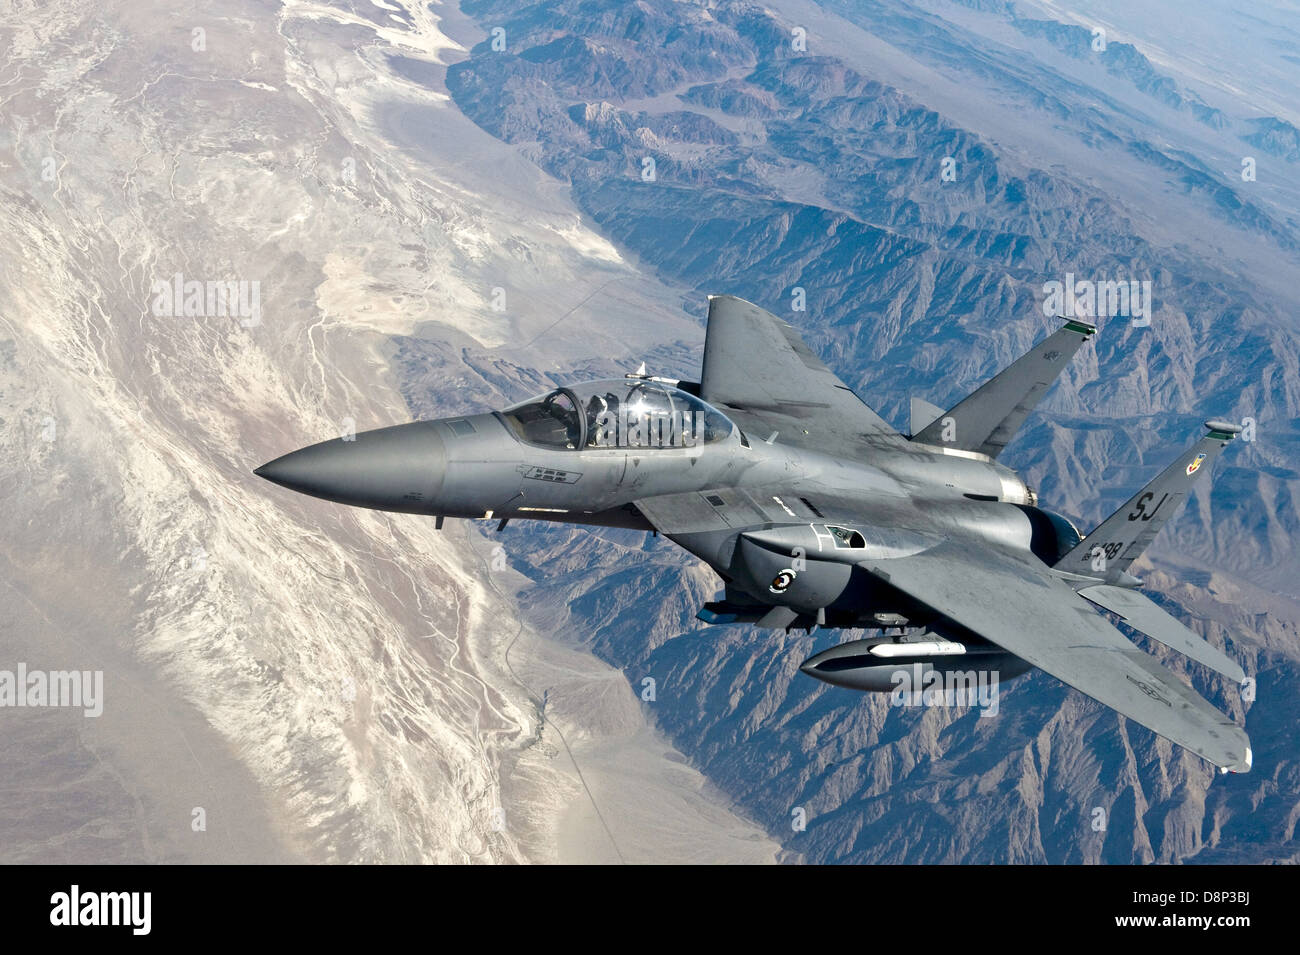 US Air Force F-15E Strike Eagle fighter aircraft flies over the desert June 22, 2011 at Fort Irwin, CA. Stock Photo